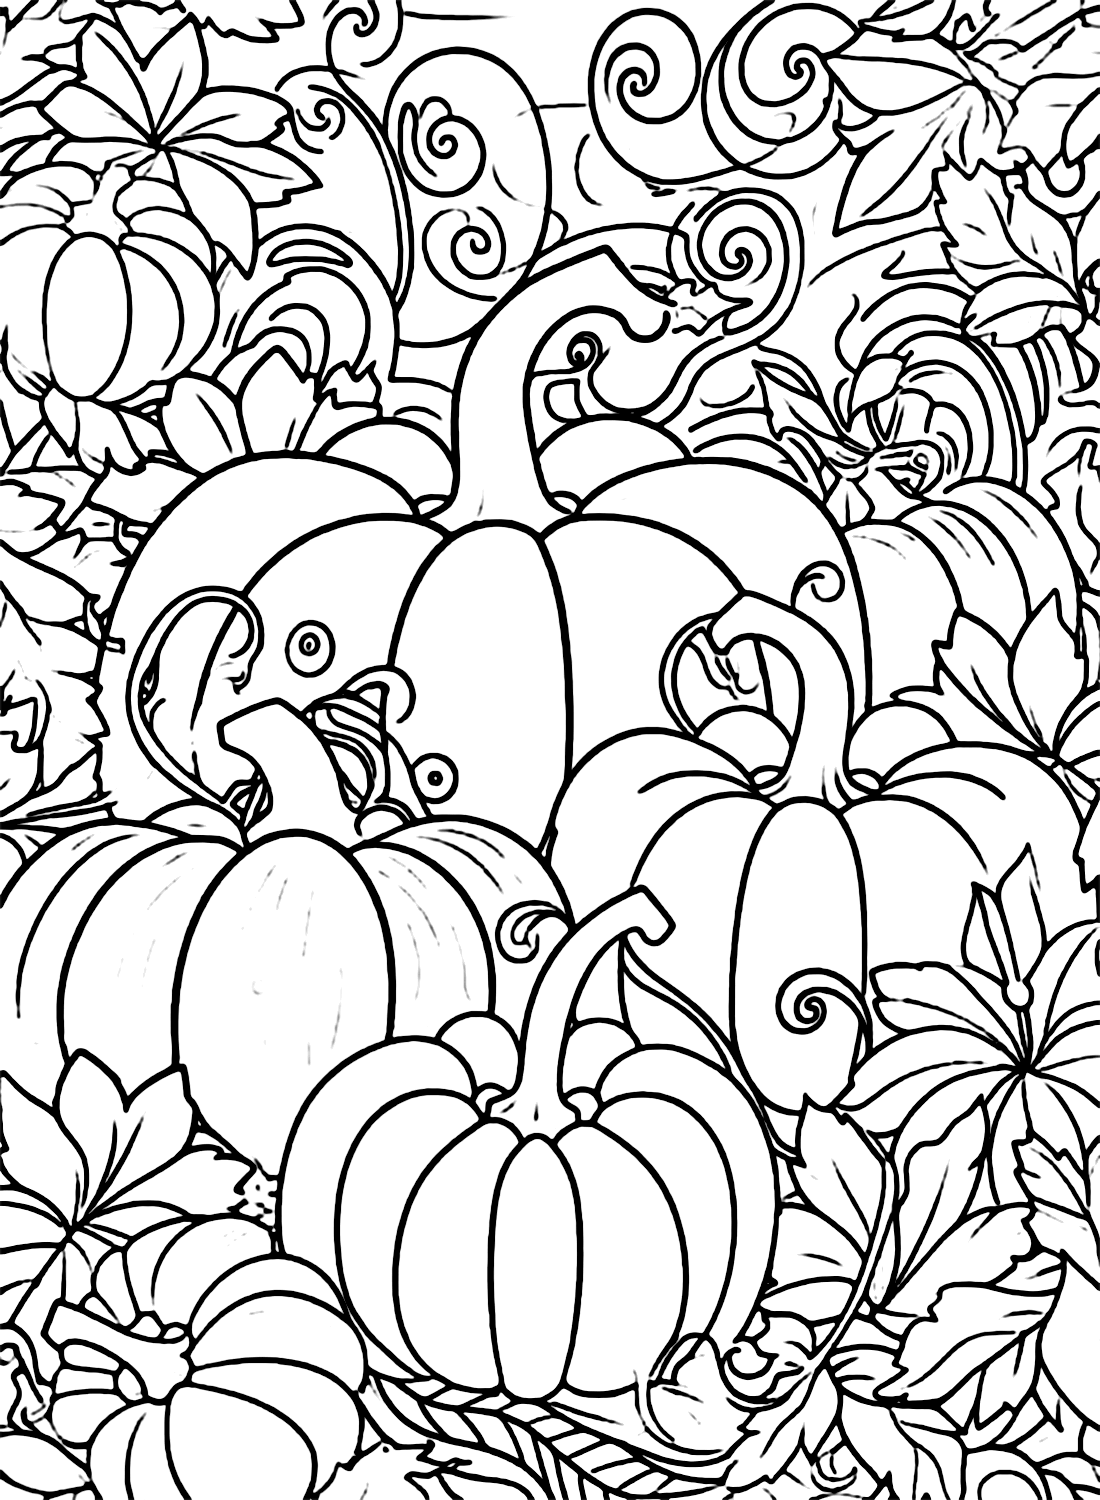 Coloring Pages of Pumpkins